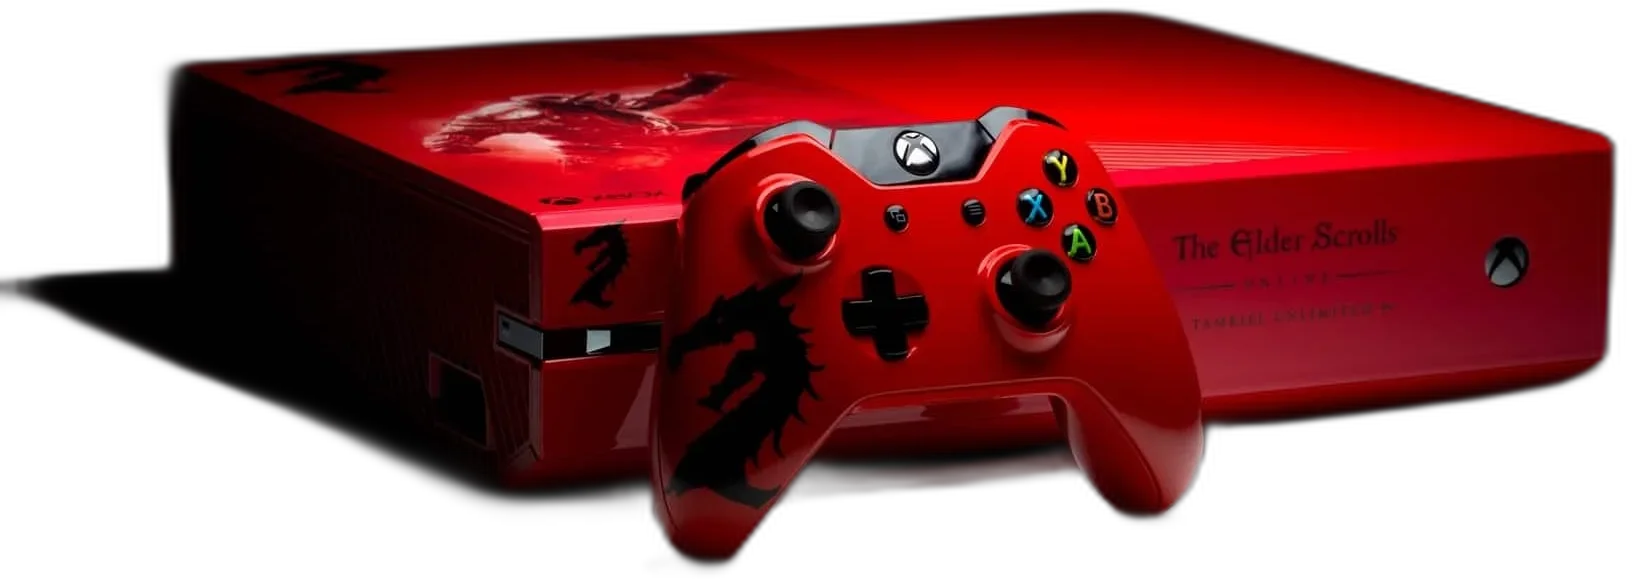  Microsoft Xbox One The Elder Scrolls Online Red Console